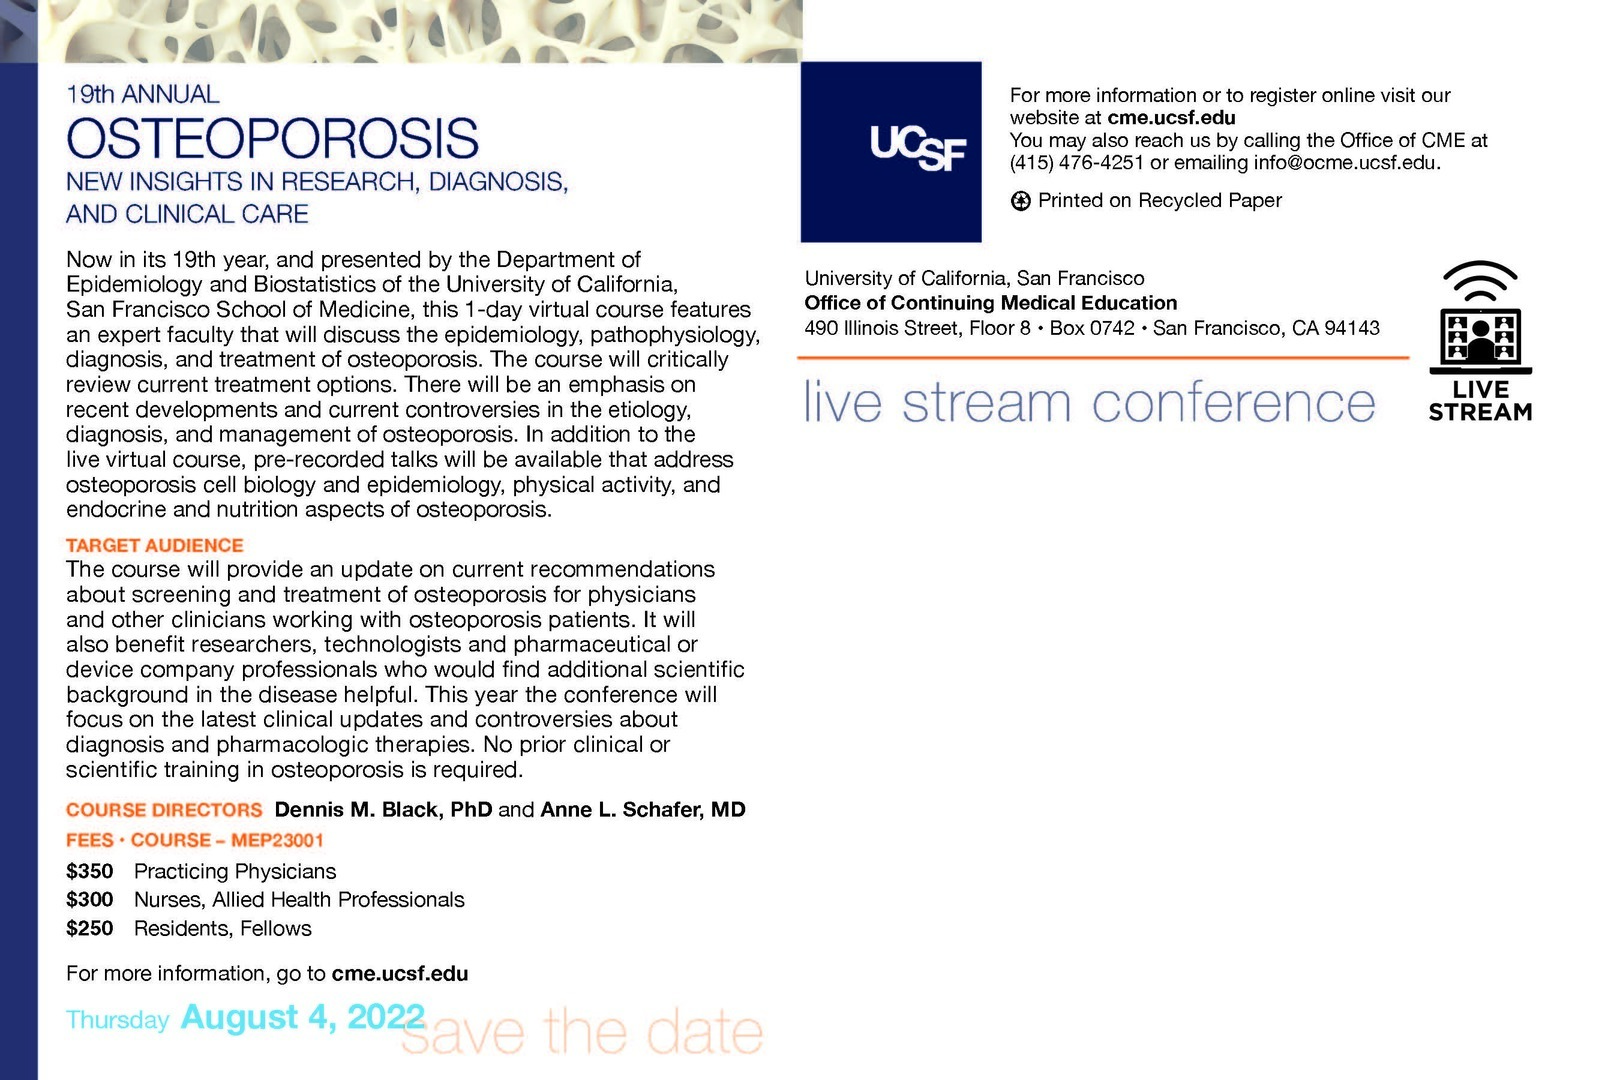 19th Annual UCSF Osteoporosis: New Insights in Research, Diagnosis, and Clinic Care